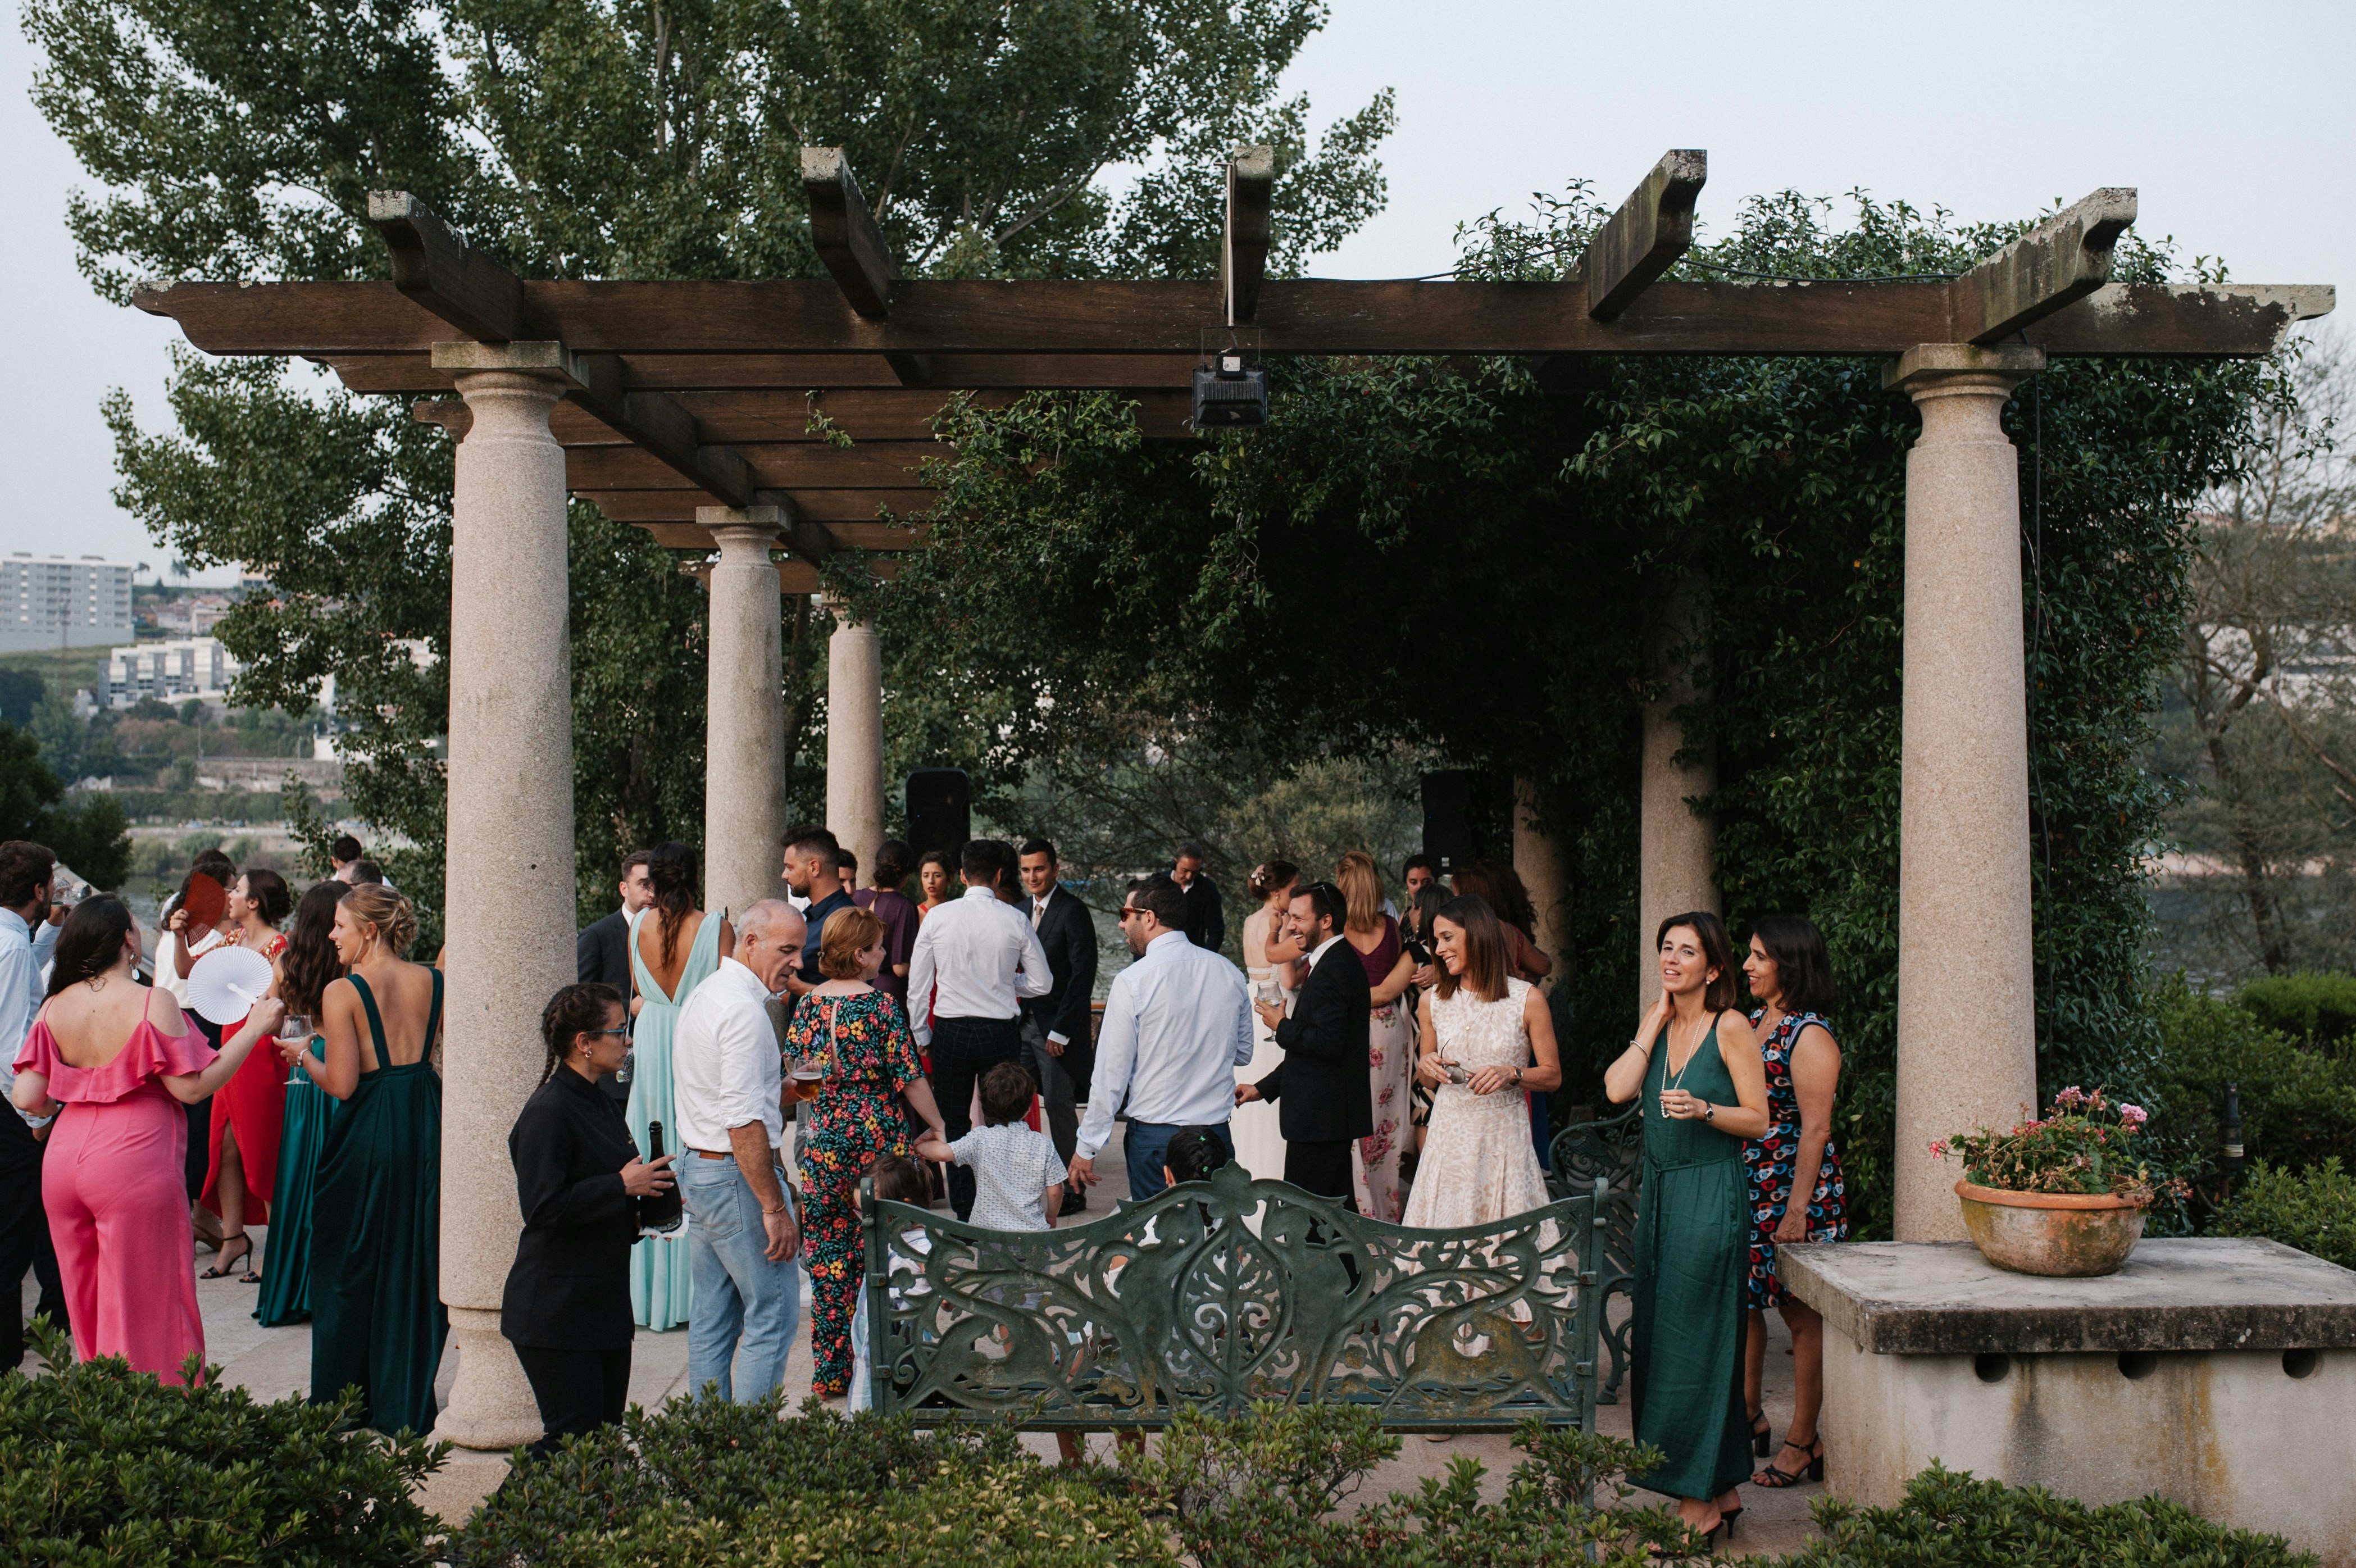 A group of wedding guests are standing together outside under a decorated gazebo.